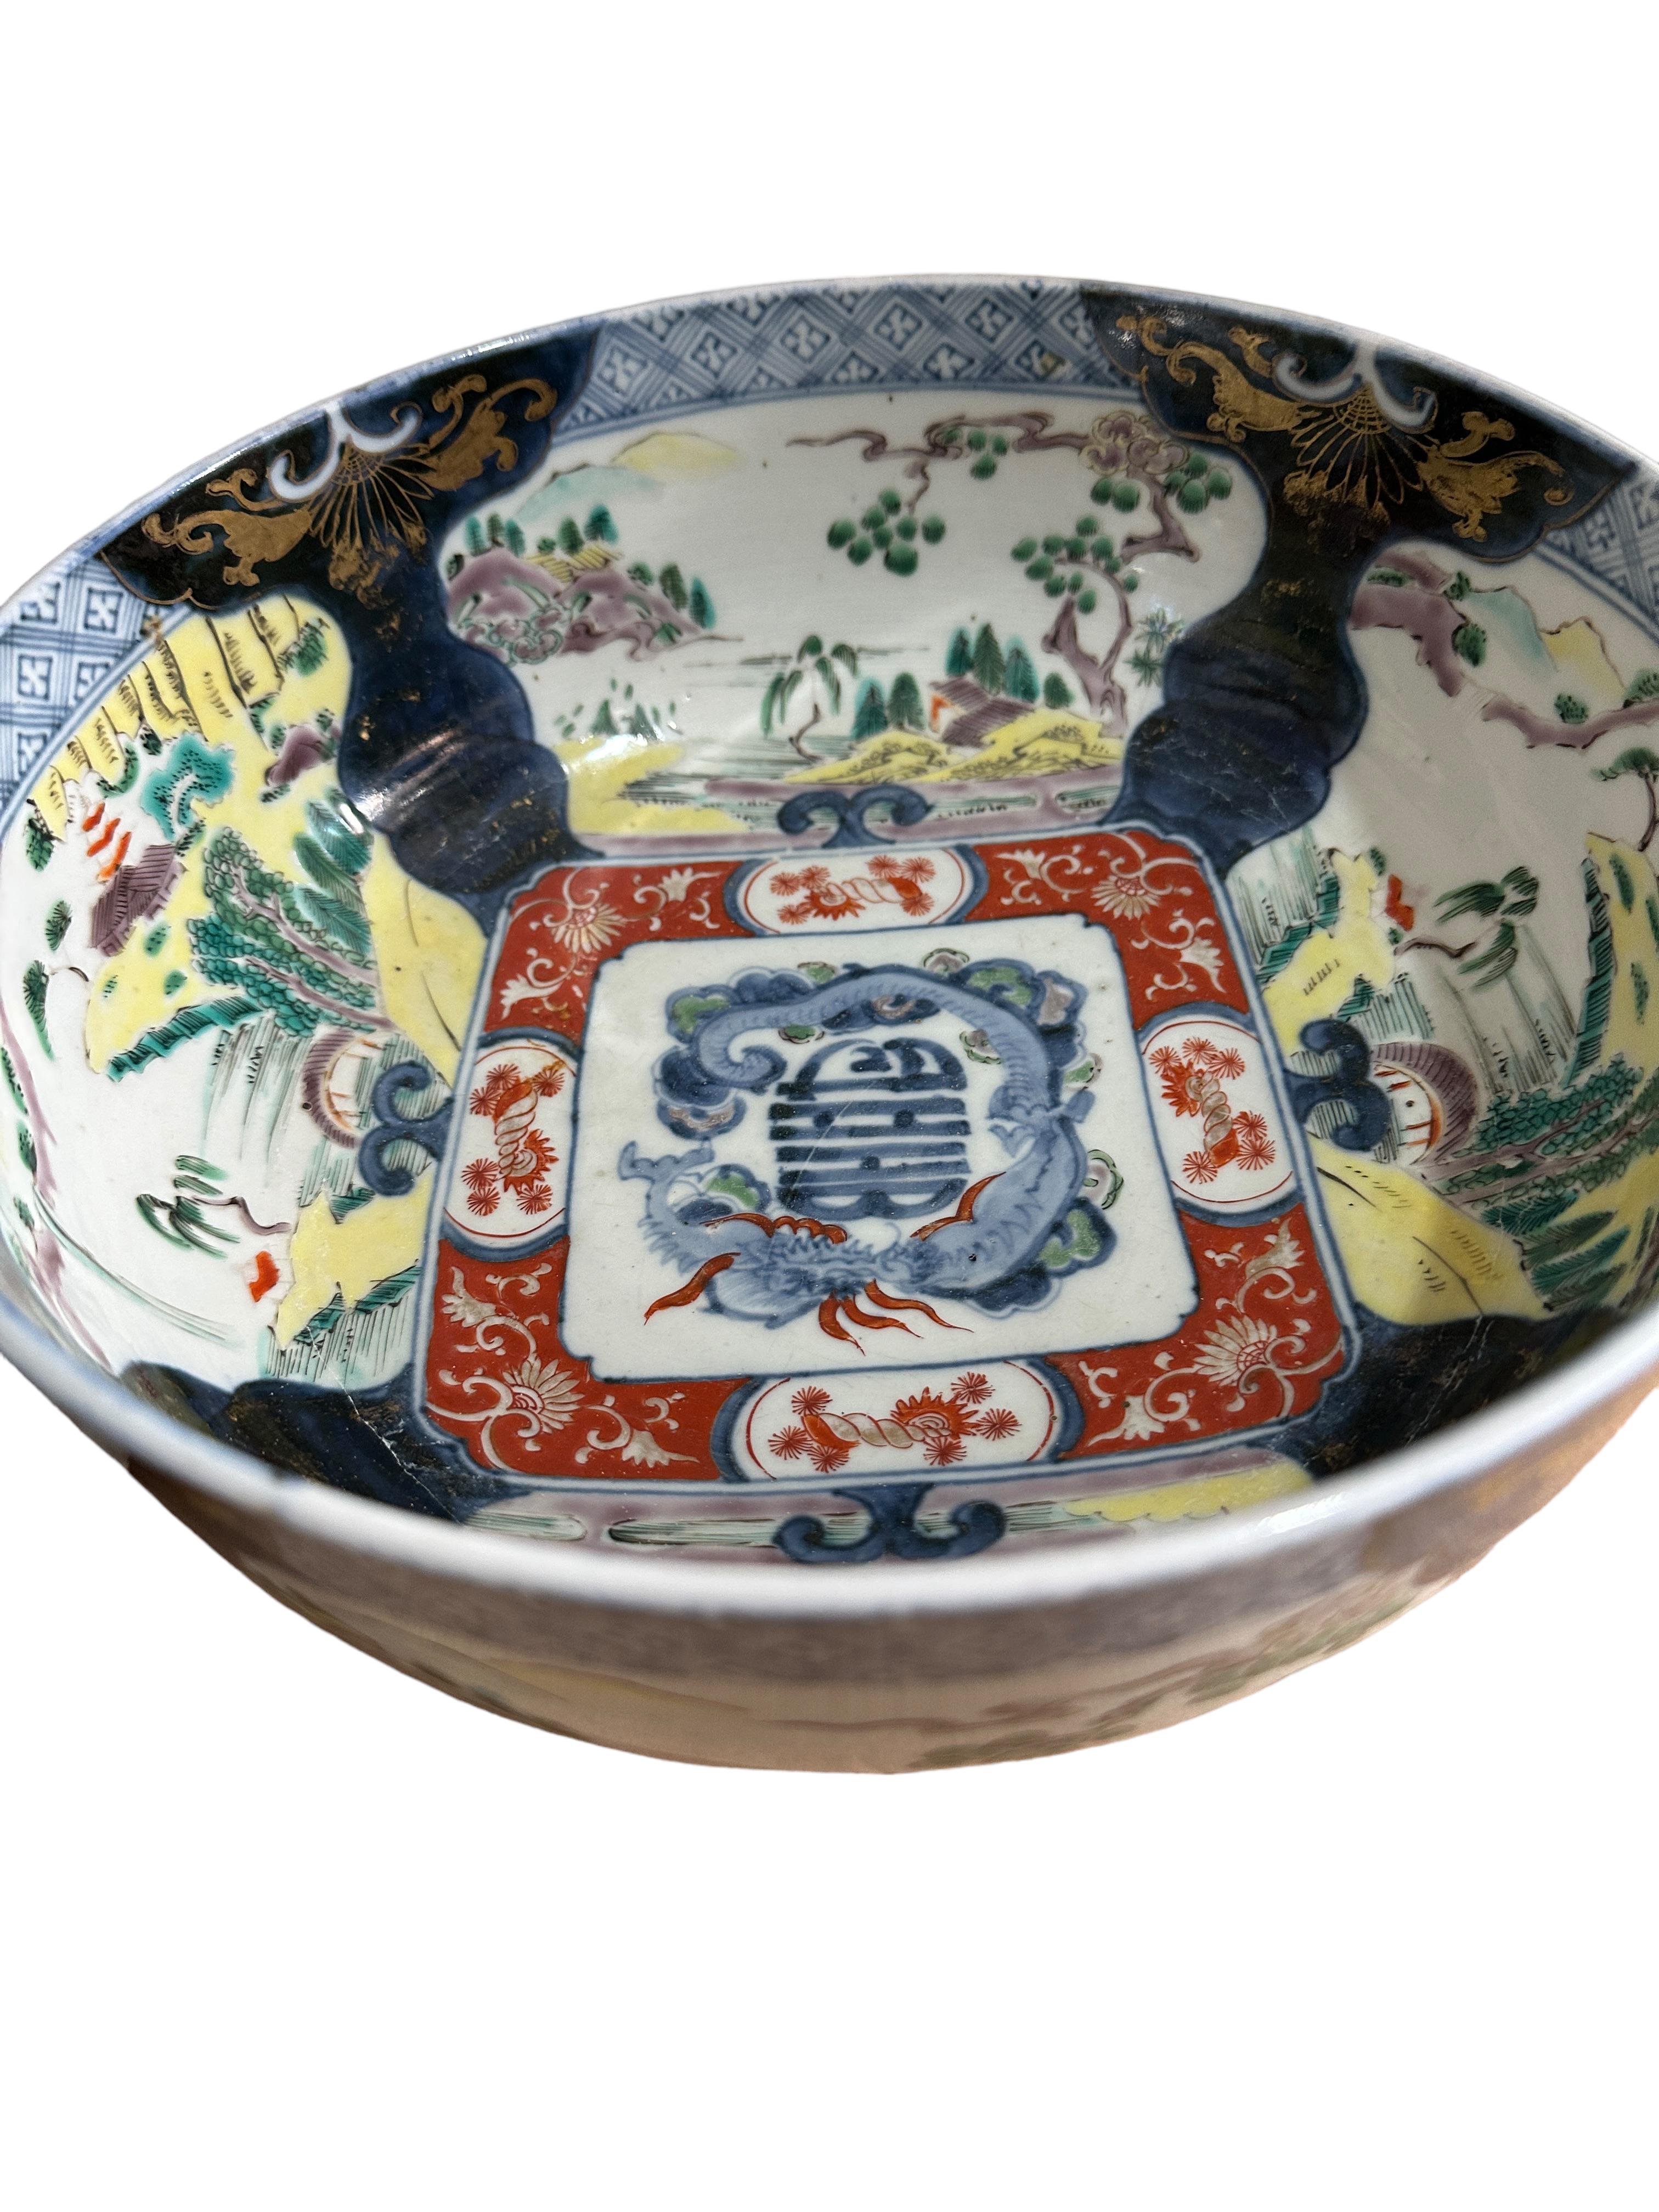 Large Antique Oriental Bowl - 25.5cm diameter and 11.5cm tall. - Image 8 of 8